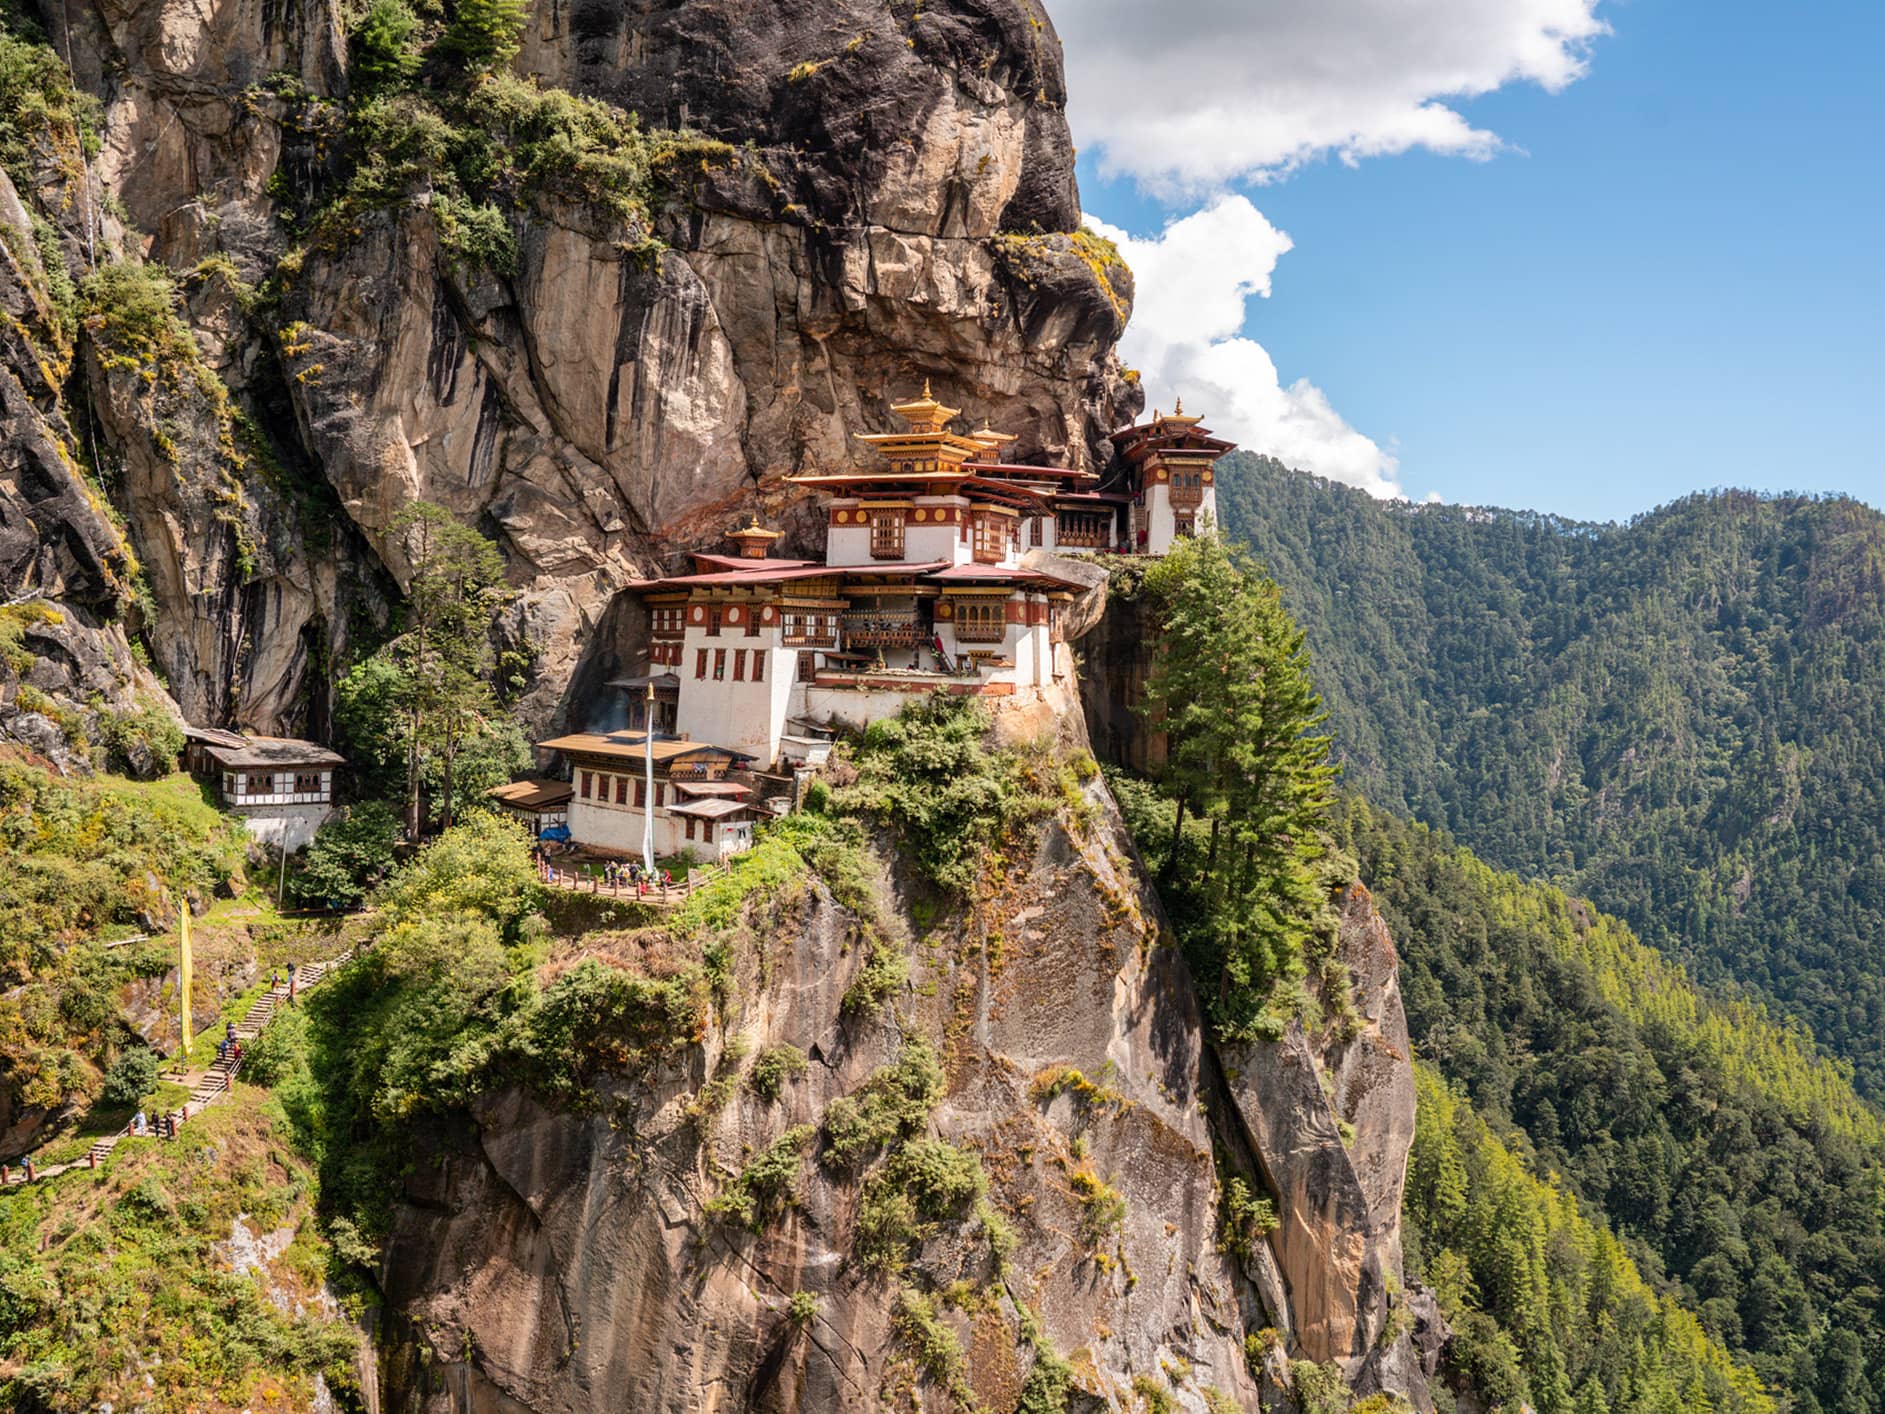  Hike to the spectacular Tiger's Nest Monastery  